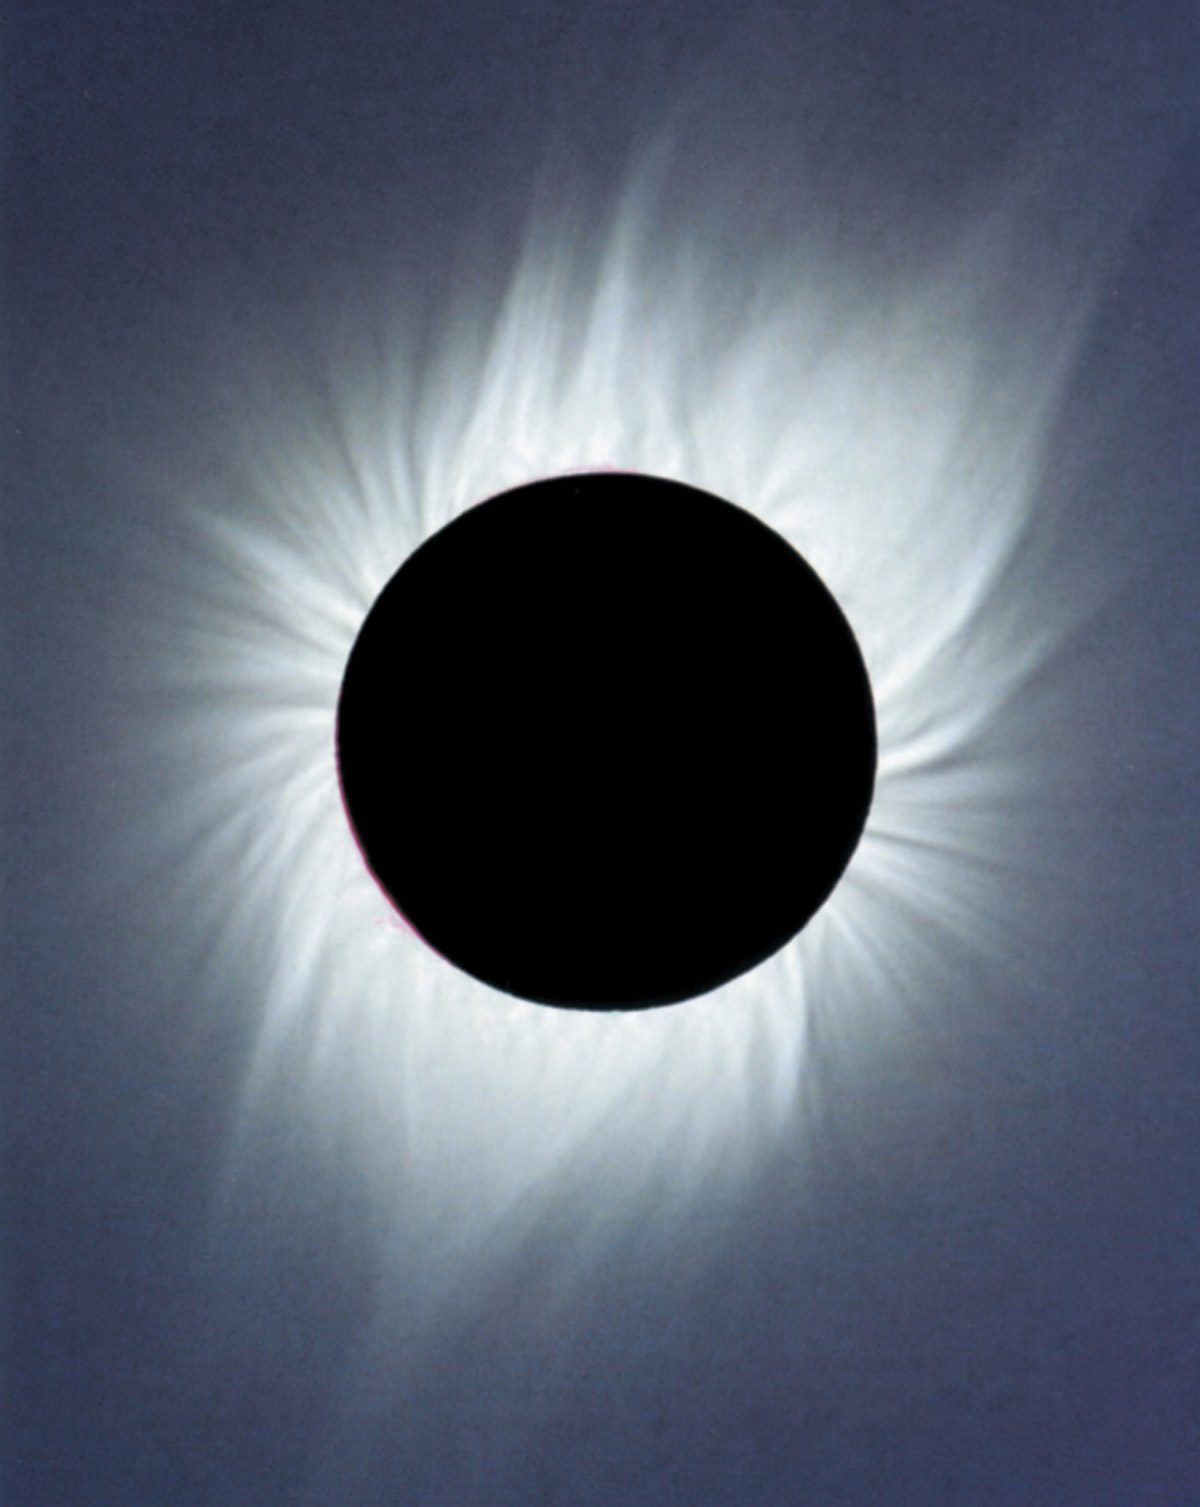 Photograph by Fred Espianak of a solar eclipse, 26 February 1998.